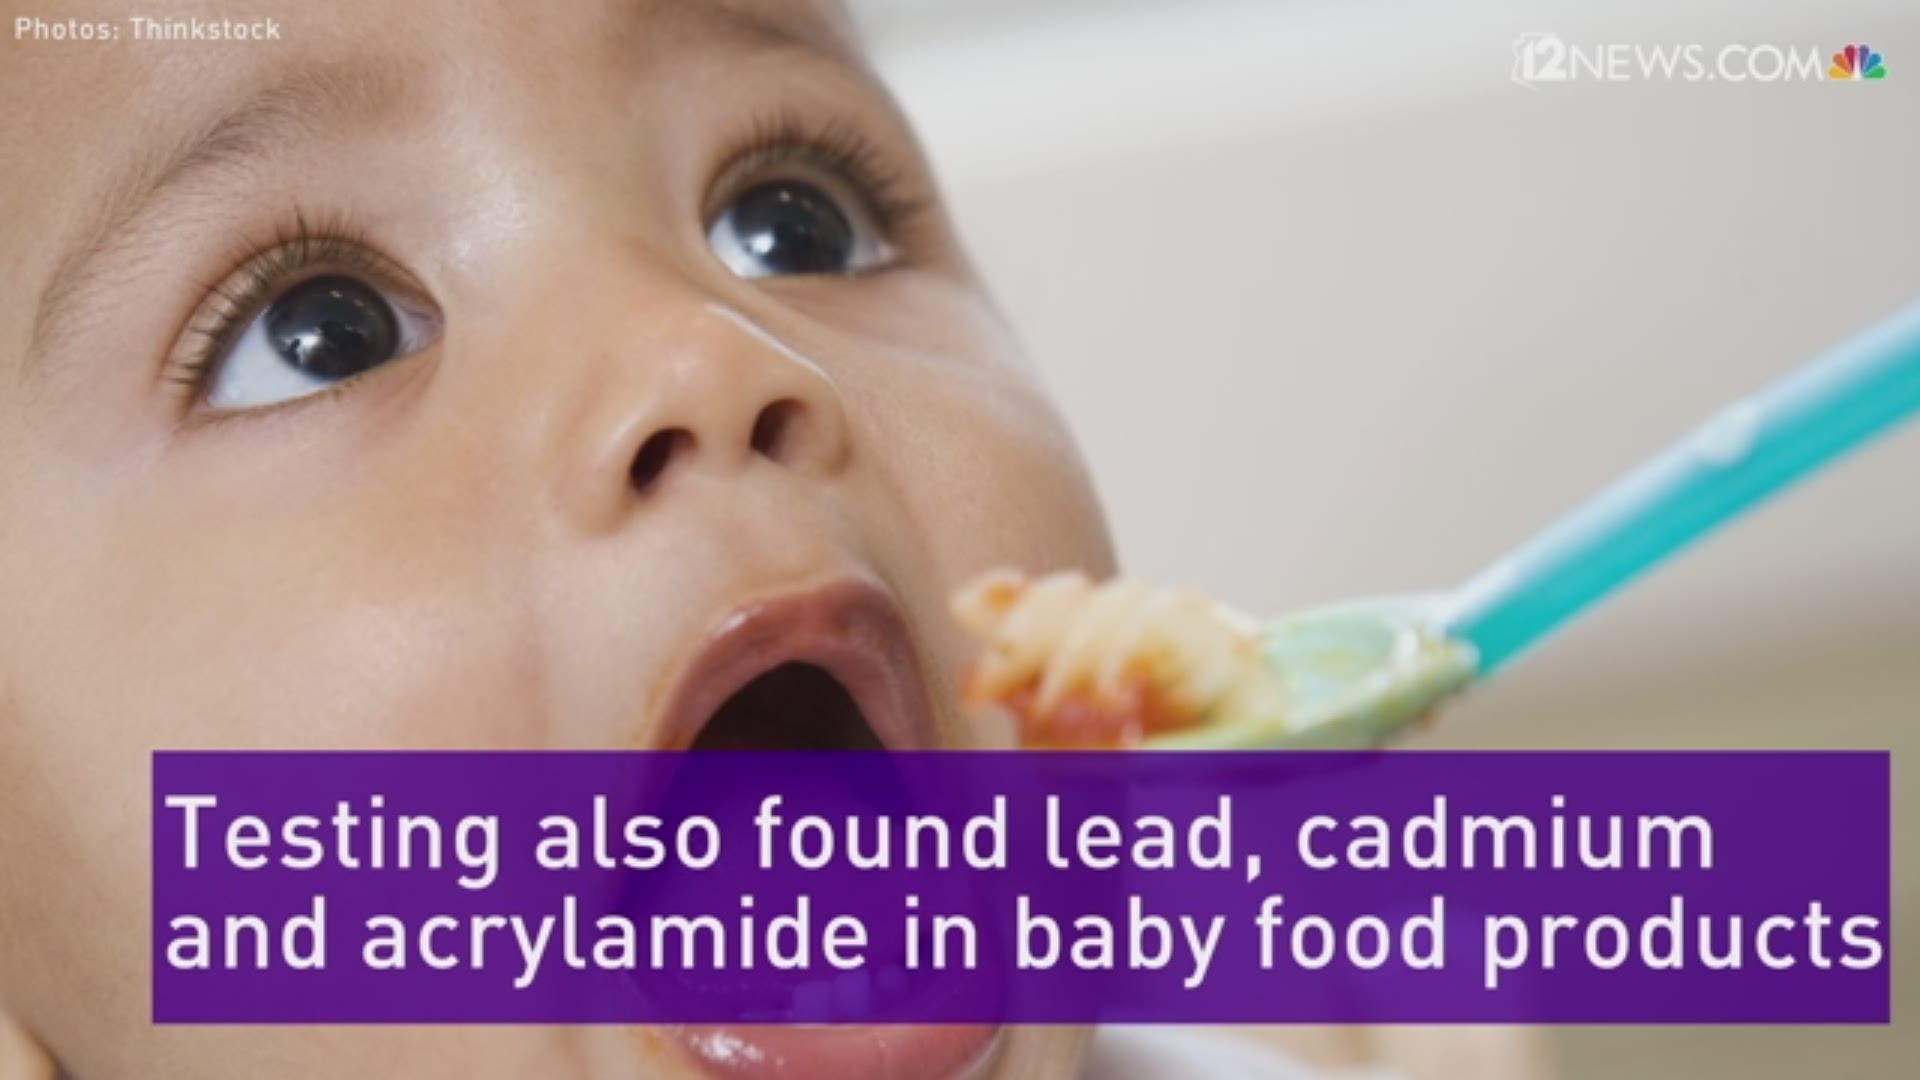 Big brands including Gerber, Enfamil, Plum Organics and Sprout were among the worst offenders - scoring two out of five in the Clean Label Project's report card for toxic metals.